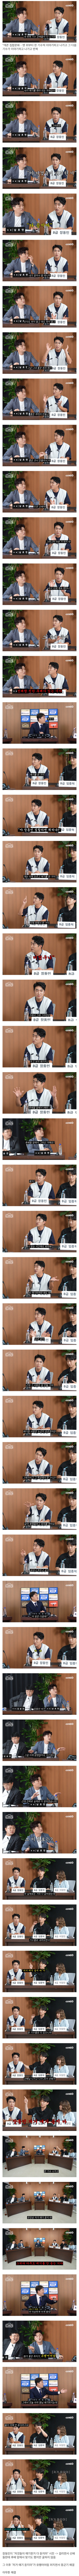 Jang Dong-min succeeded in getting rid of Gaekon's poor military culture